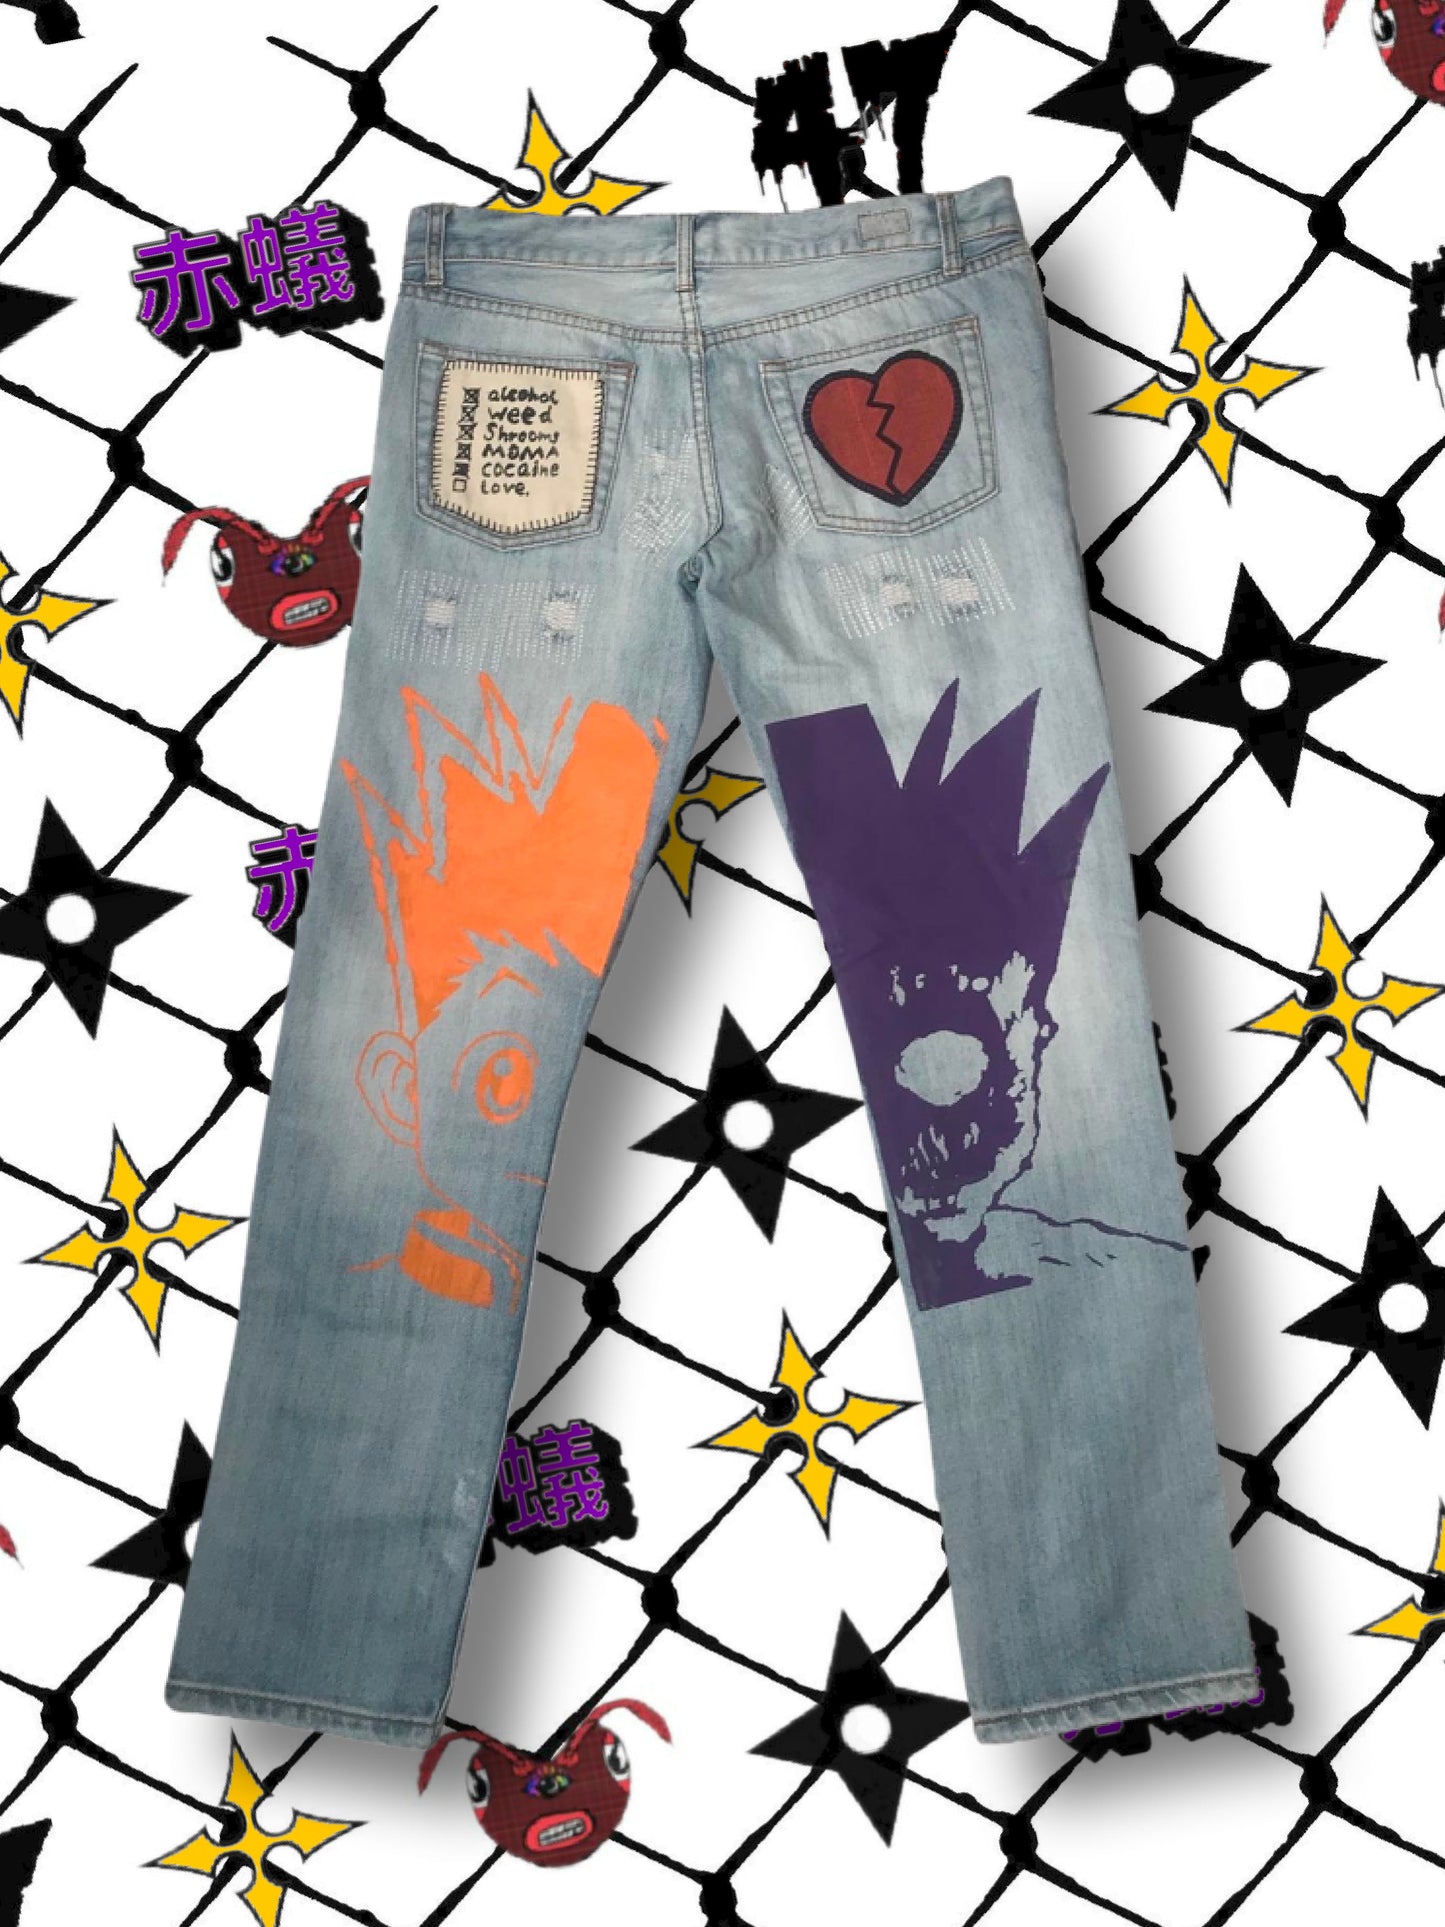 1/1 "Ripped Gon" Jeans